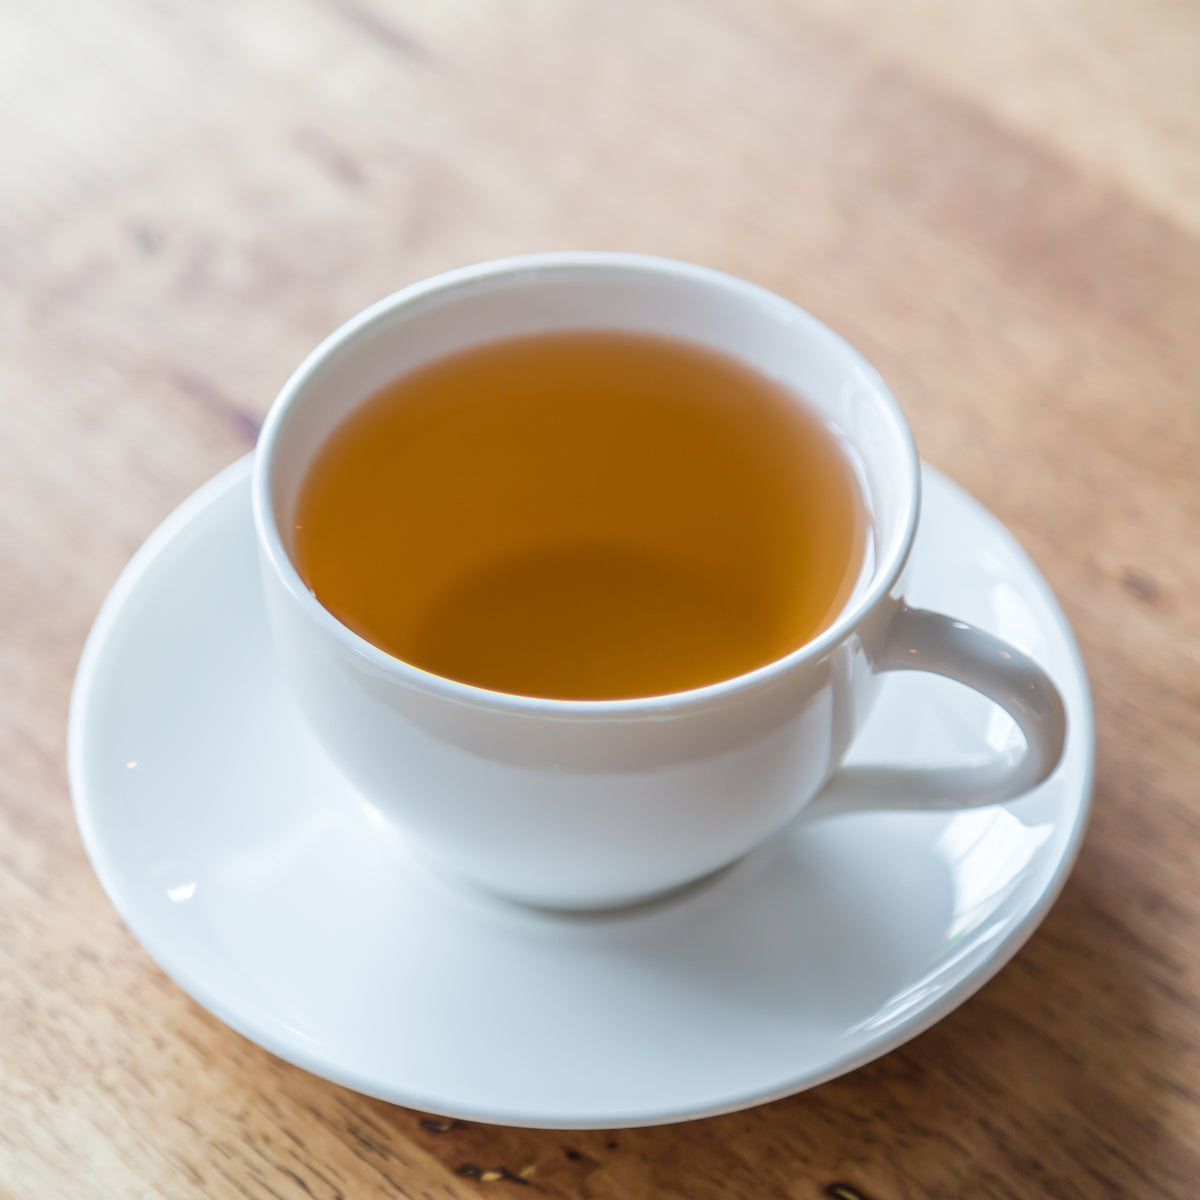 Locally Sourced Teas In The U.S. Are Steeping